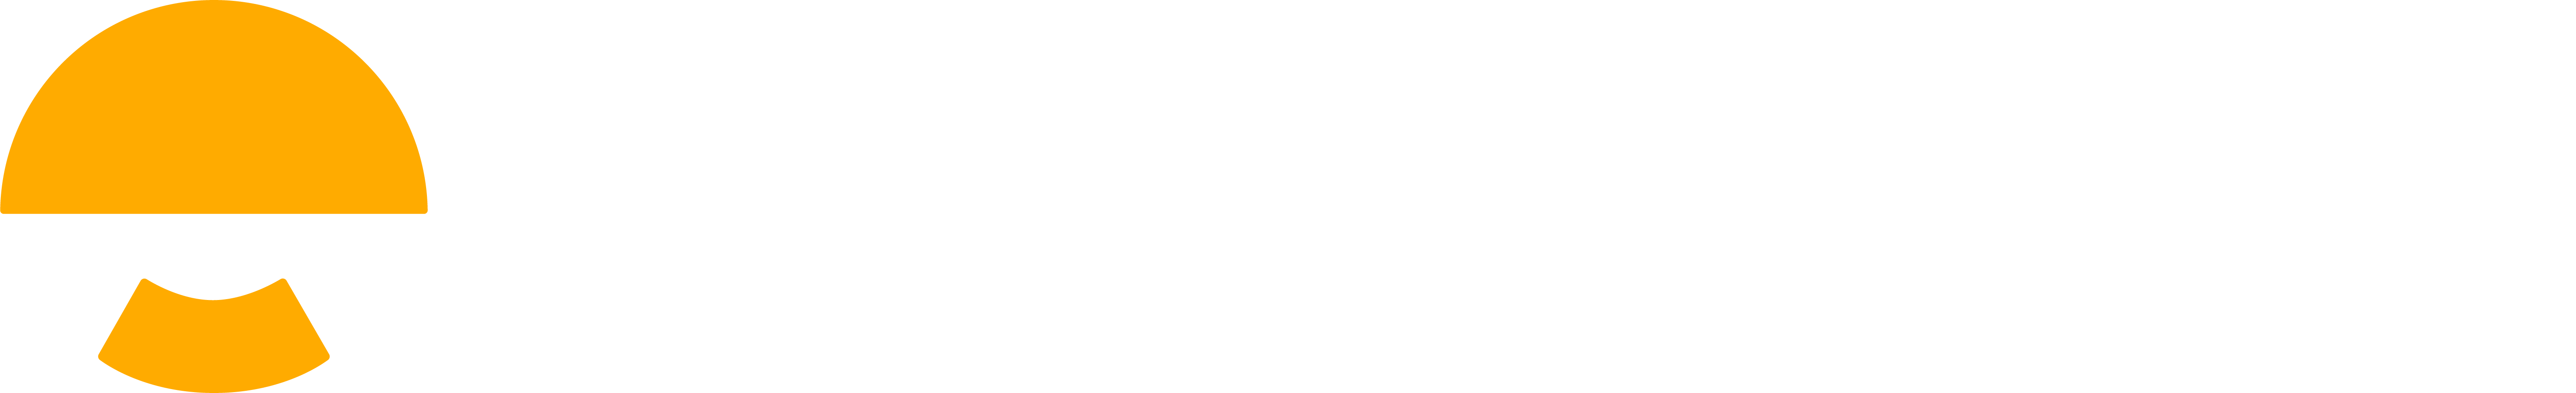 The House Fund logo in alternative colors